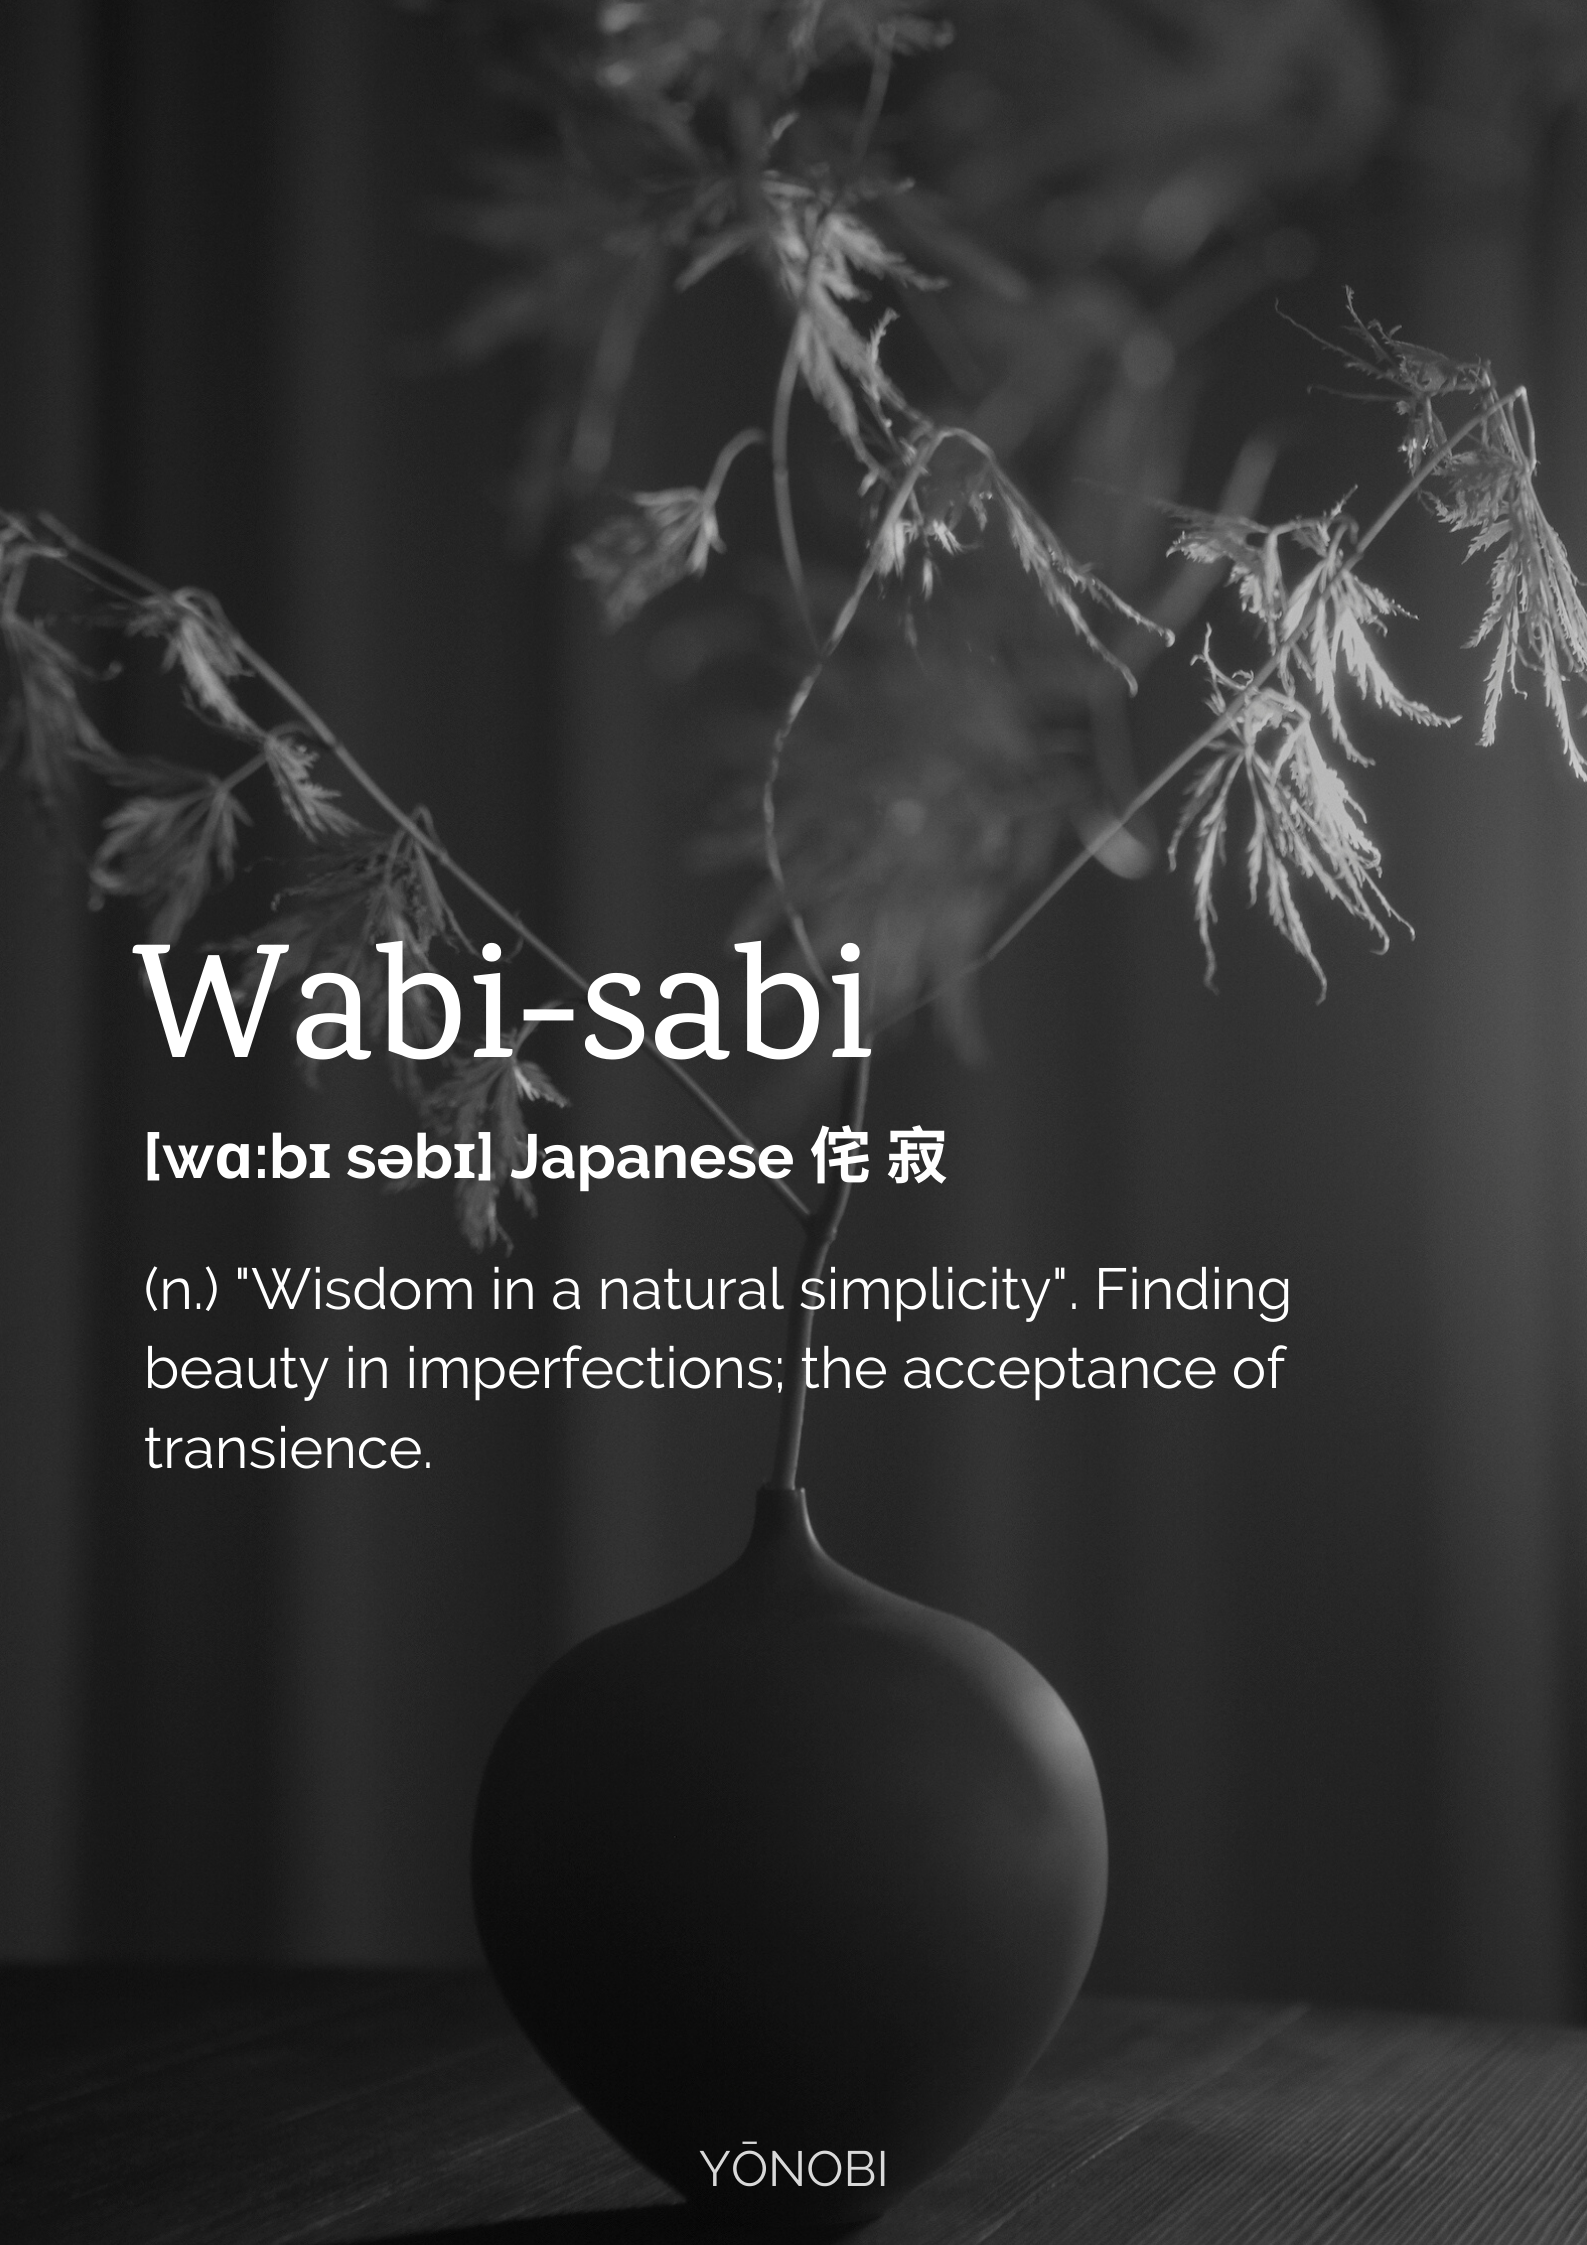 Find joy in the imperfect with the philosophy of Wabi-Sabi | elephant